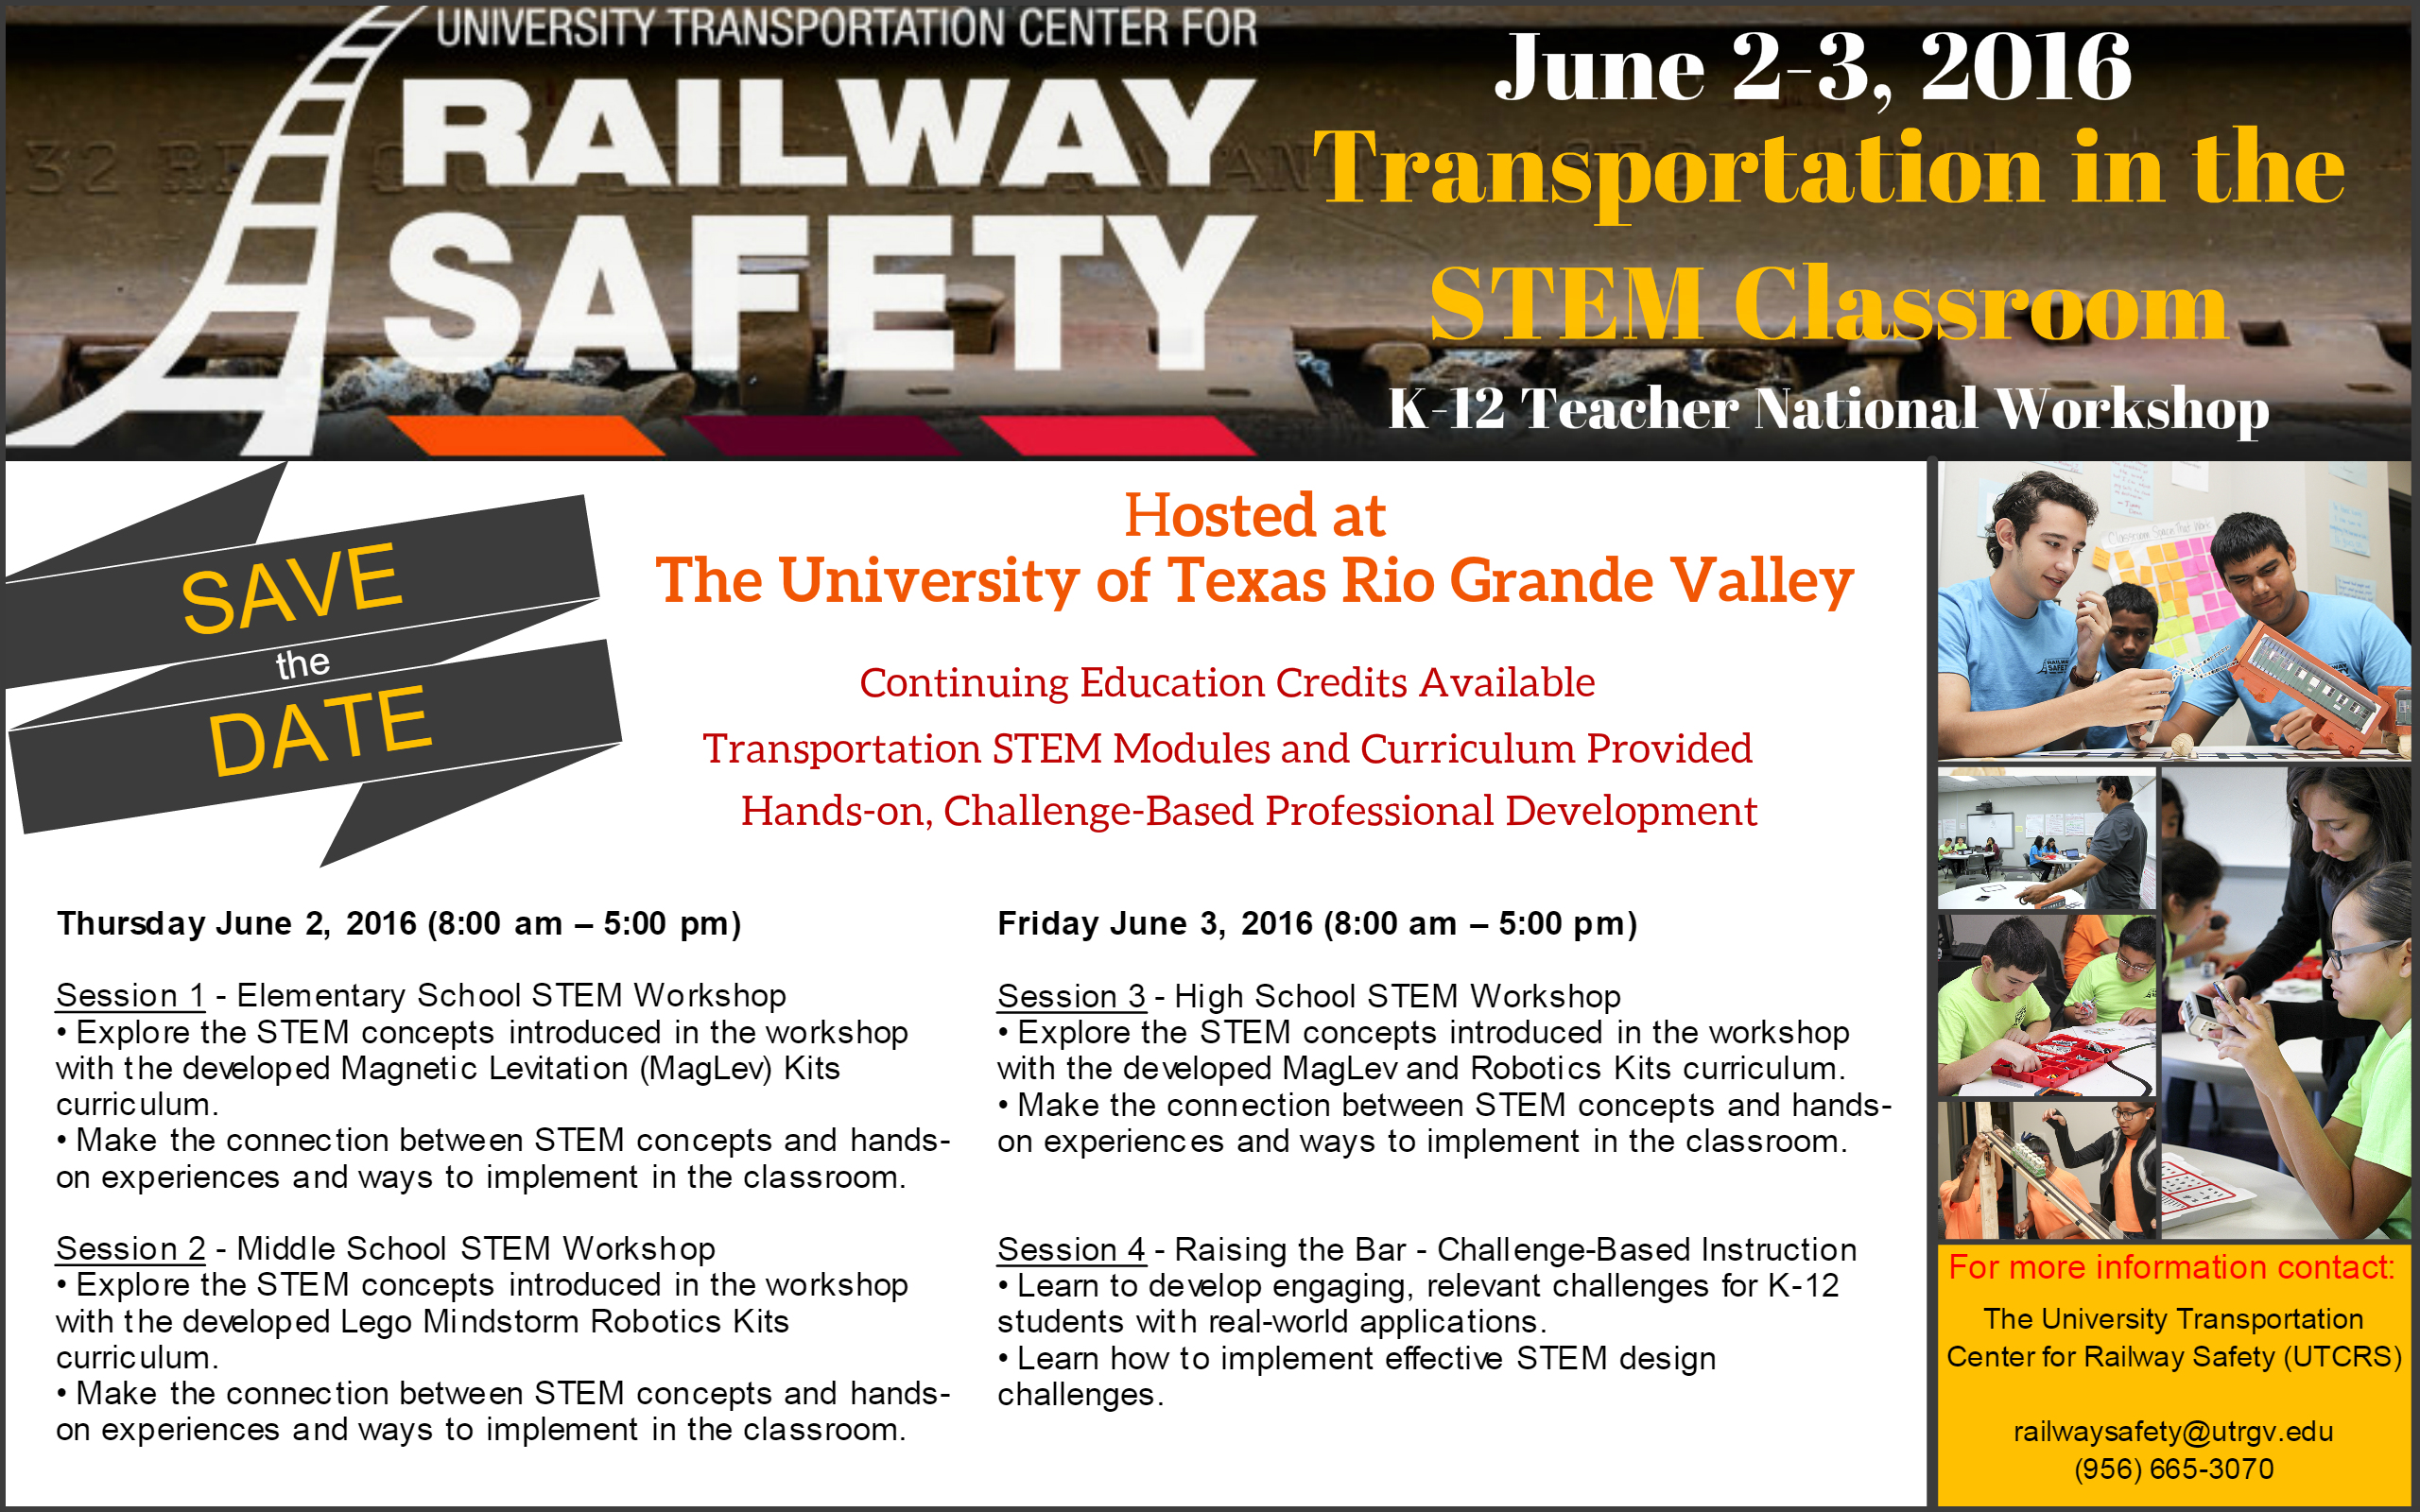 The University Transportation Center for Railway Safety (UTCRS)  Announces   Transportation in the Classroom:  K-12 STEM Teacher National Workshop  Date:  June 2-3, 2016 Time: 8 a.m. – 5 p.m. Location:  The University Transportation Center for Railway Safety (UTCRS) 1201 W. University Drive ENGR Portable 1.100 Edinburg, Texas 78539-2999 Phone: (956) 665-3070 | Thursday June 2, 2016 (8:00 am - 5:00 pm)  Session 1 - Elementary School STEM Workshop  Explore the STEM concepts introduced in the workshop with the developed Magnetic Levitation (MagLev) Kits curriculum. Make the connection between STEM concepts and hands-on experiences and ways to implement in the classroom. | Session 2 - Middle School STEM Workshop  Explore the STEM concepts introduced in the workshop with the developed Lego Mindstorm Robotics Kits curriculum. Make the connection between STEM concepts and hands-on experiences and ways to implement in the classroom. |  Friday June 3, 2016  Session 3 - High School STEM Workshop  Explore the STEM concepts introduced in the workshop with the developed MagLev and Robotics Kits curriculum. Make the connection between STEM concepts and hands-on experiences to implement in the classroom.| Session 4 - Raising the Bar - Challenge-Based Instruction  Learn to develop engaging, relevant challenges for K-12 students with real-world applications. Learn how to implement effective STEM design challenges. To better introduce participants to themes related to Transportation Engineering and Railway Safety in an interactive manner, all workshop sessions are hands-on. Please wear comfortable attire. |For more information, please contact:  The University Transportation Center for Railway Safety (UTCRS) 1201 W. University Drive ENGR Portable 1.100 Edinburg, Texas 78539-2999 Phone: (956) 665-3070 railwaysafety@utrgv.edu